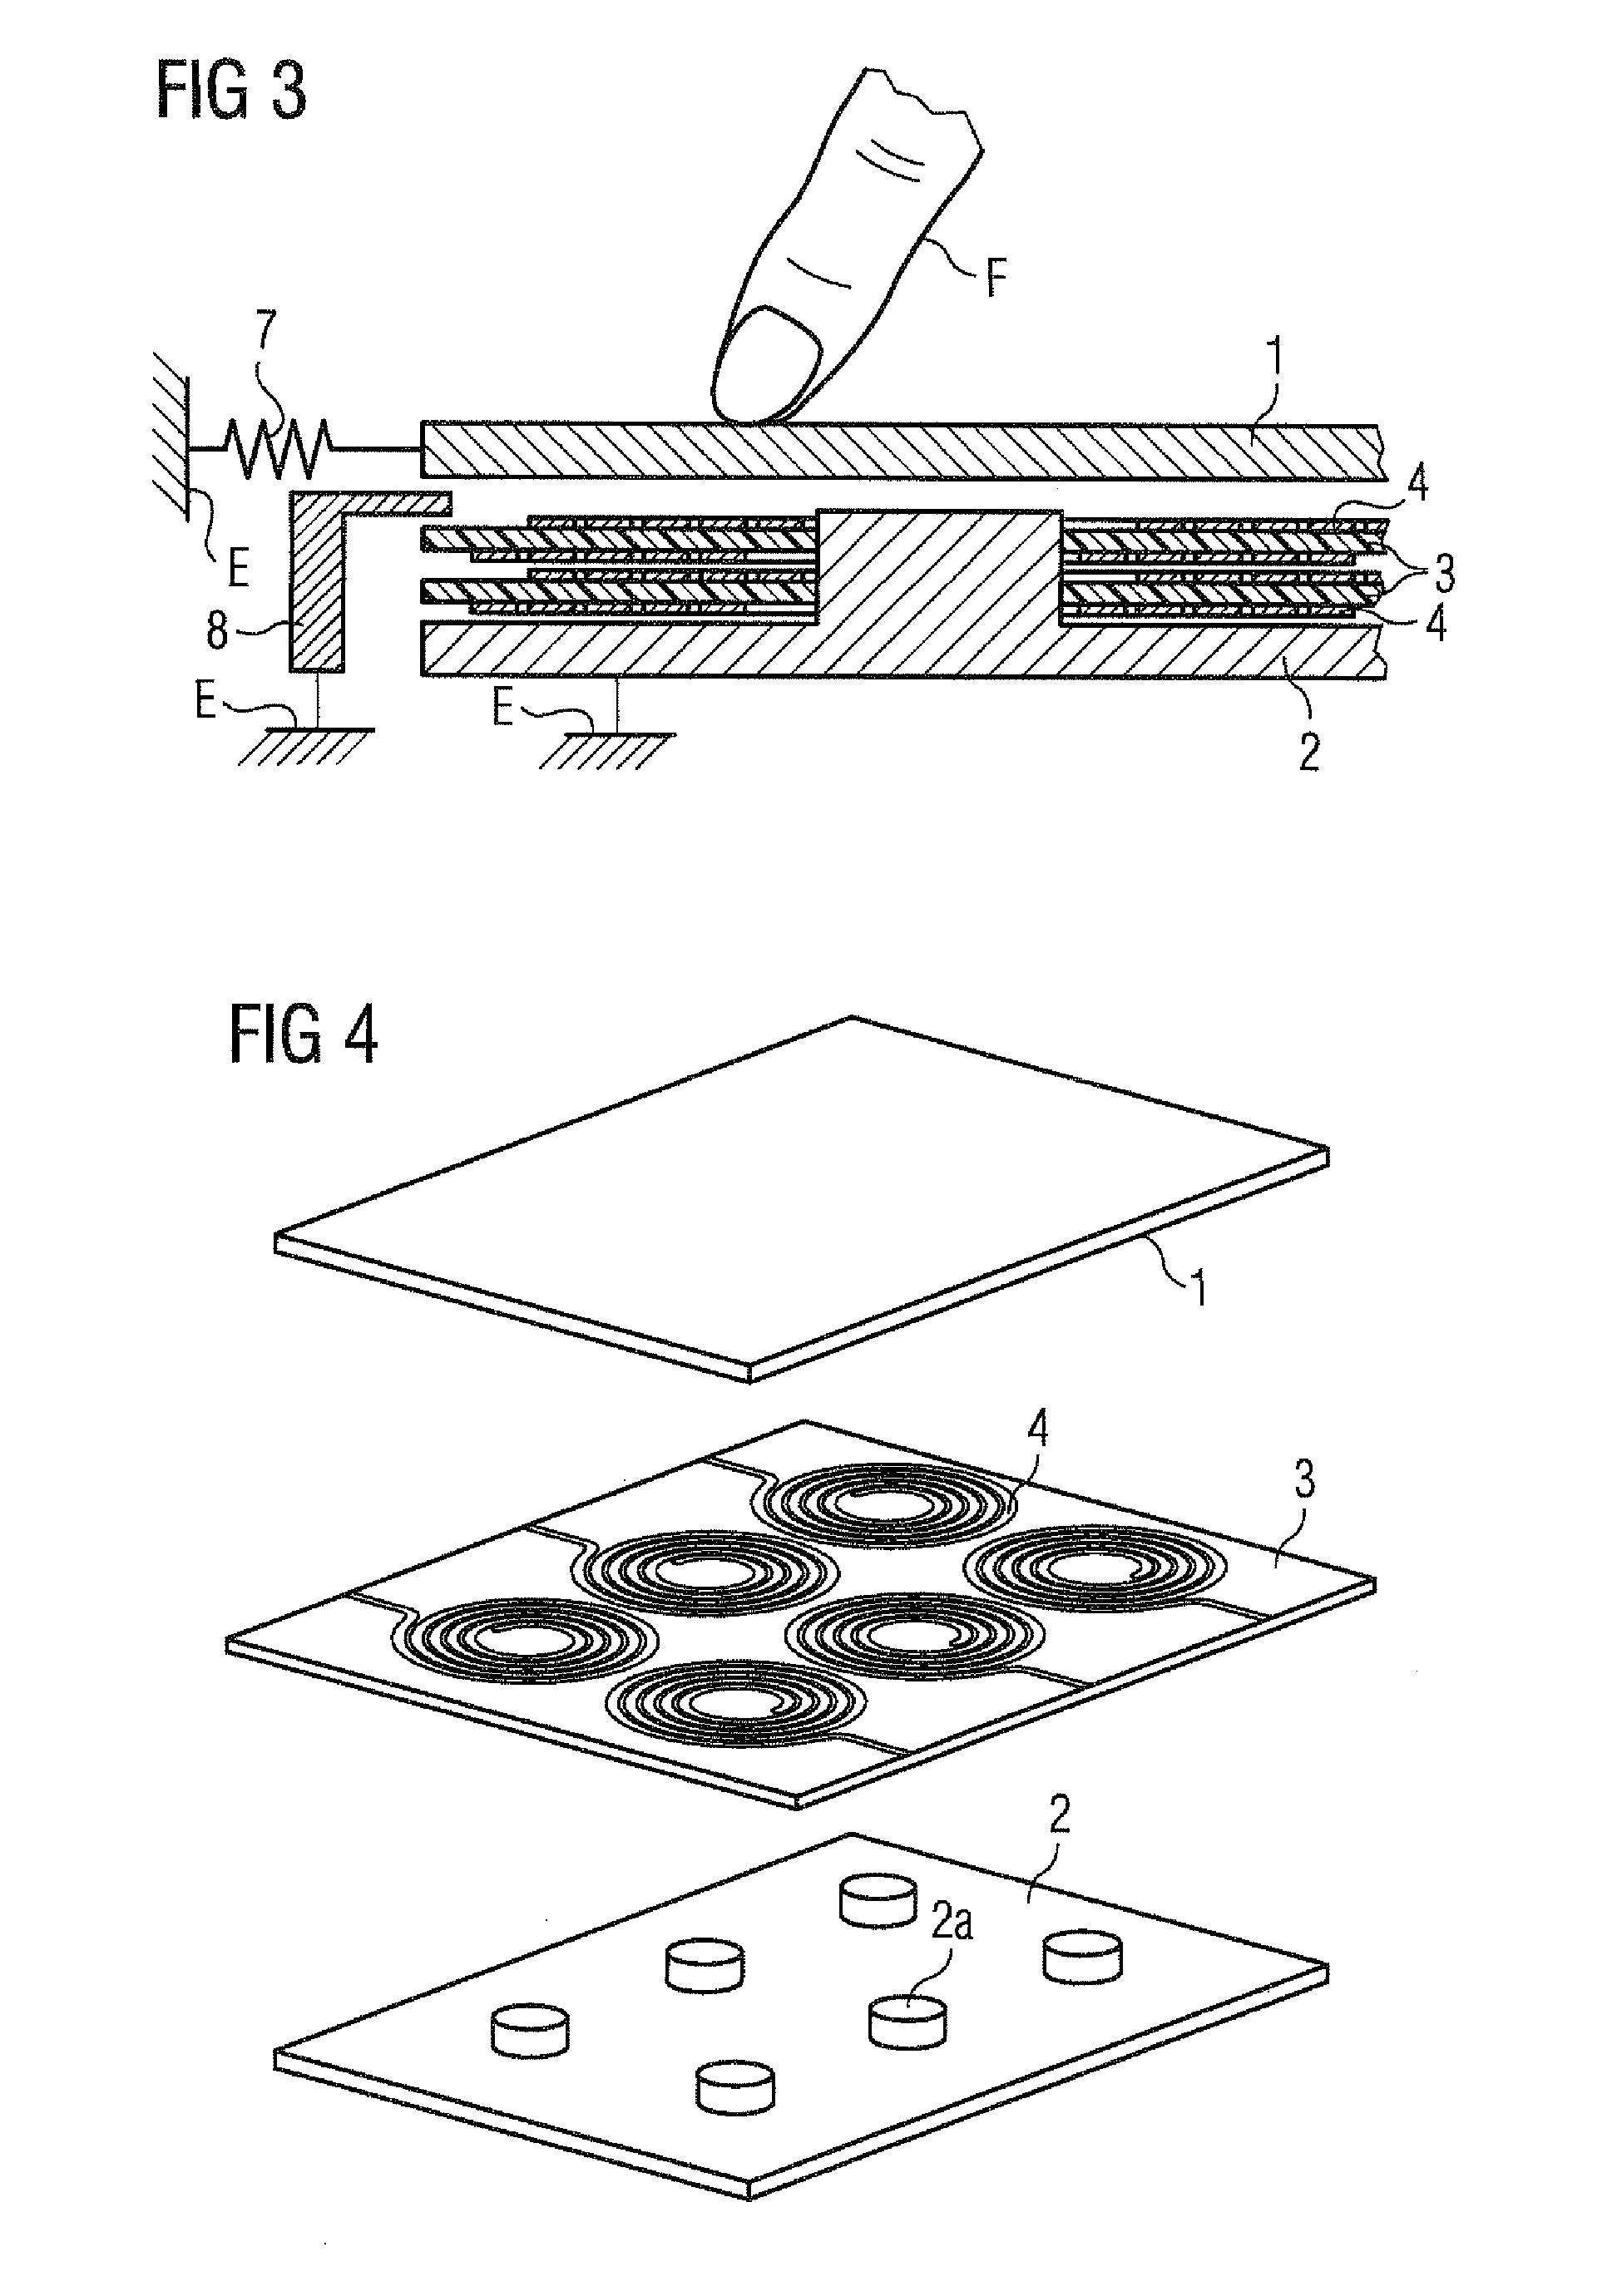 Operating device